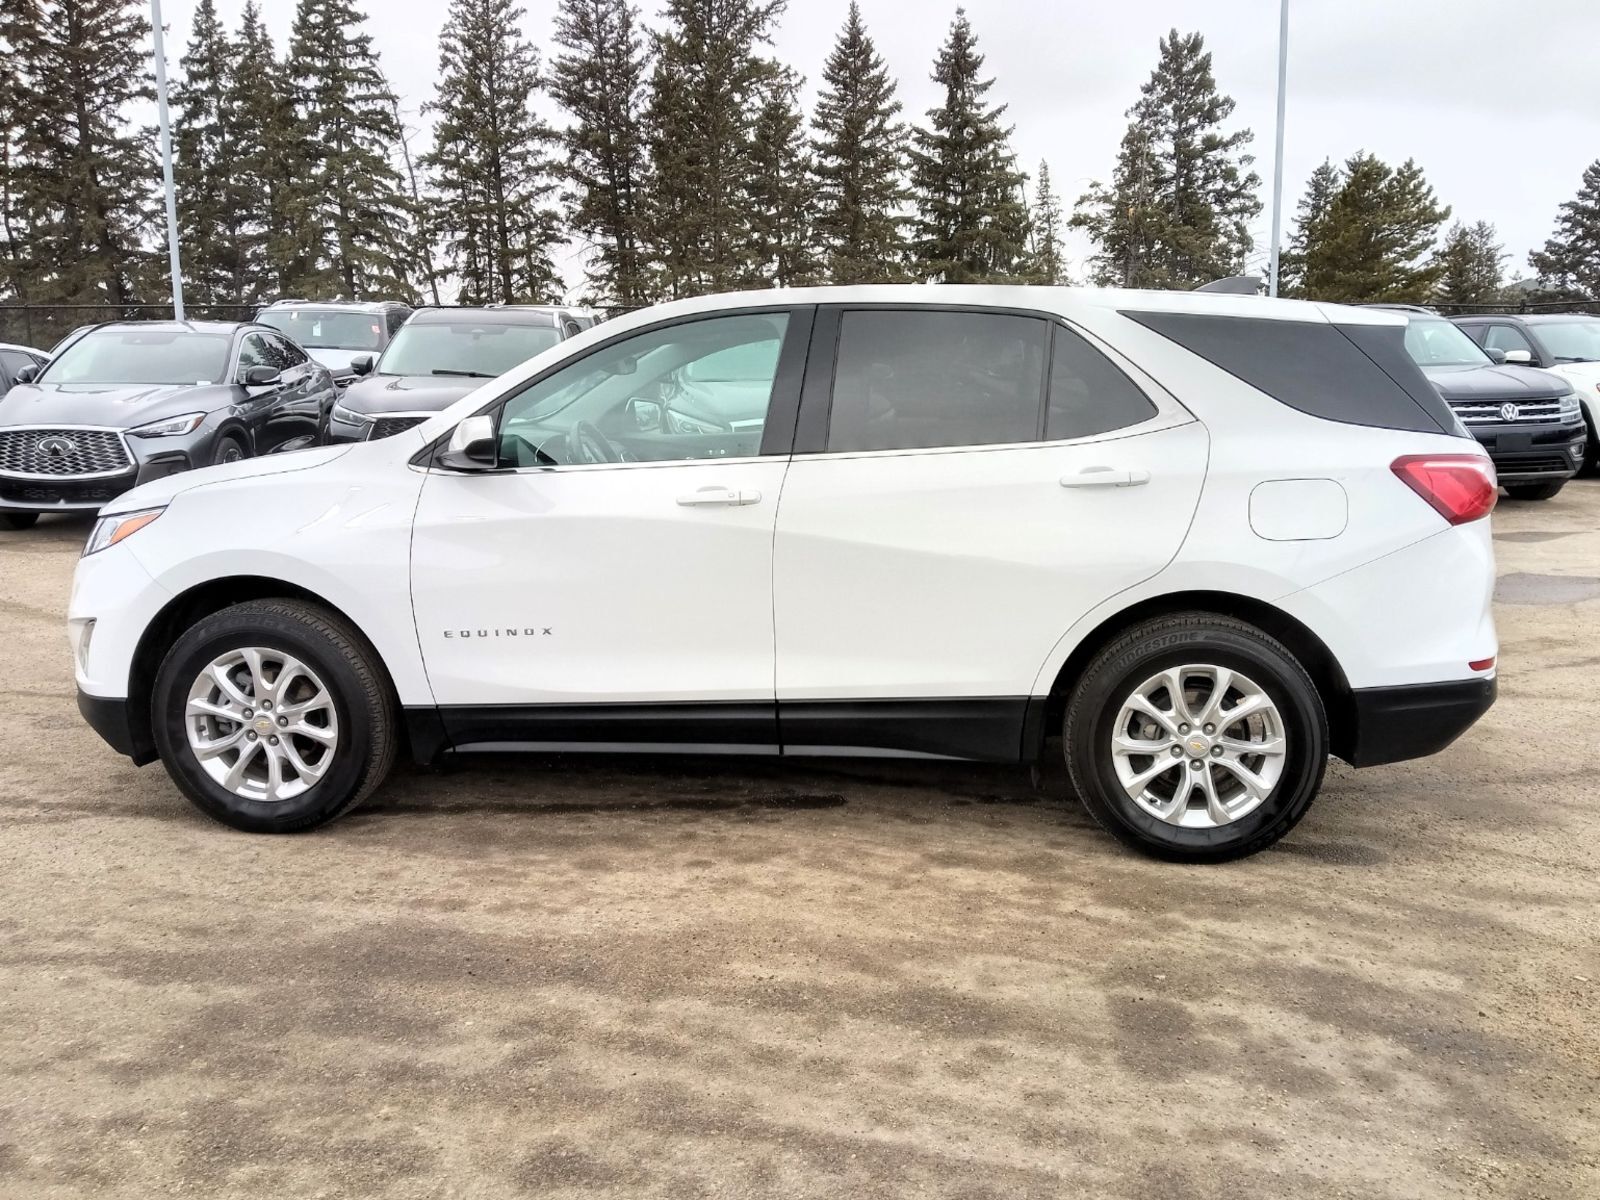 2020 Chevrolet Equinox LT, AWD, POWER SEATTS, HEATED SEATS, BACK-UP CAMER